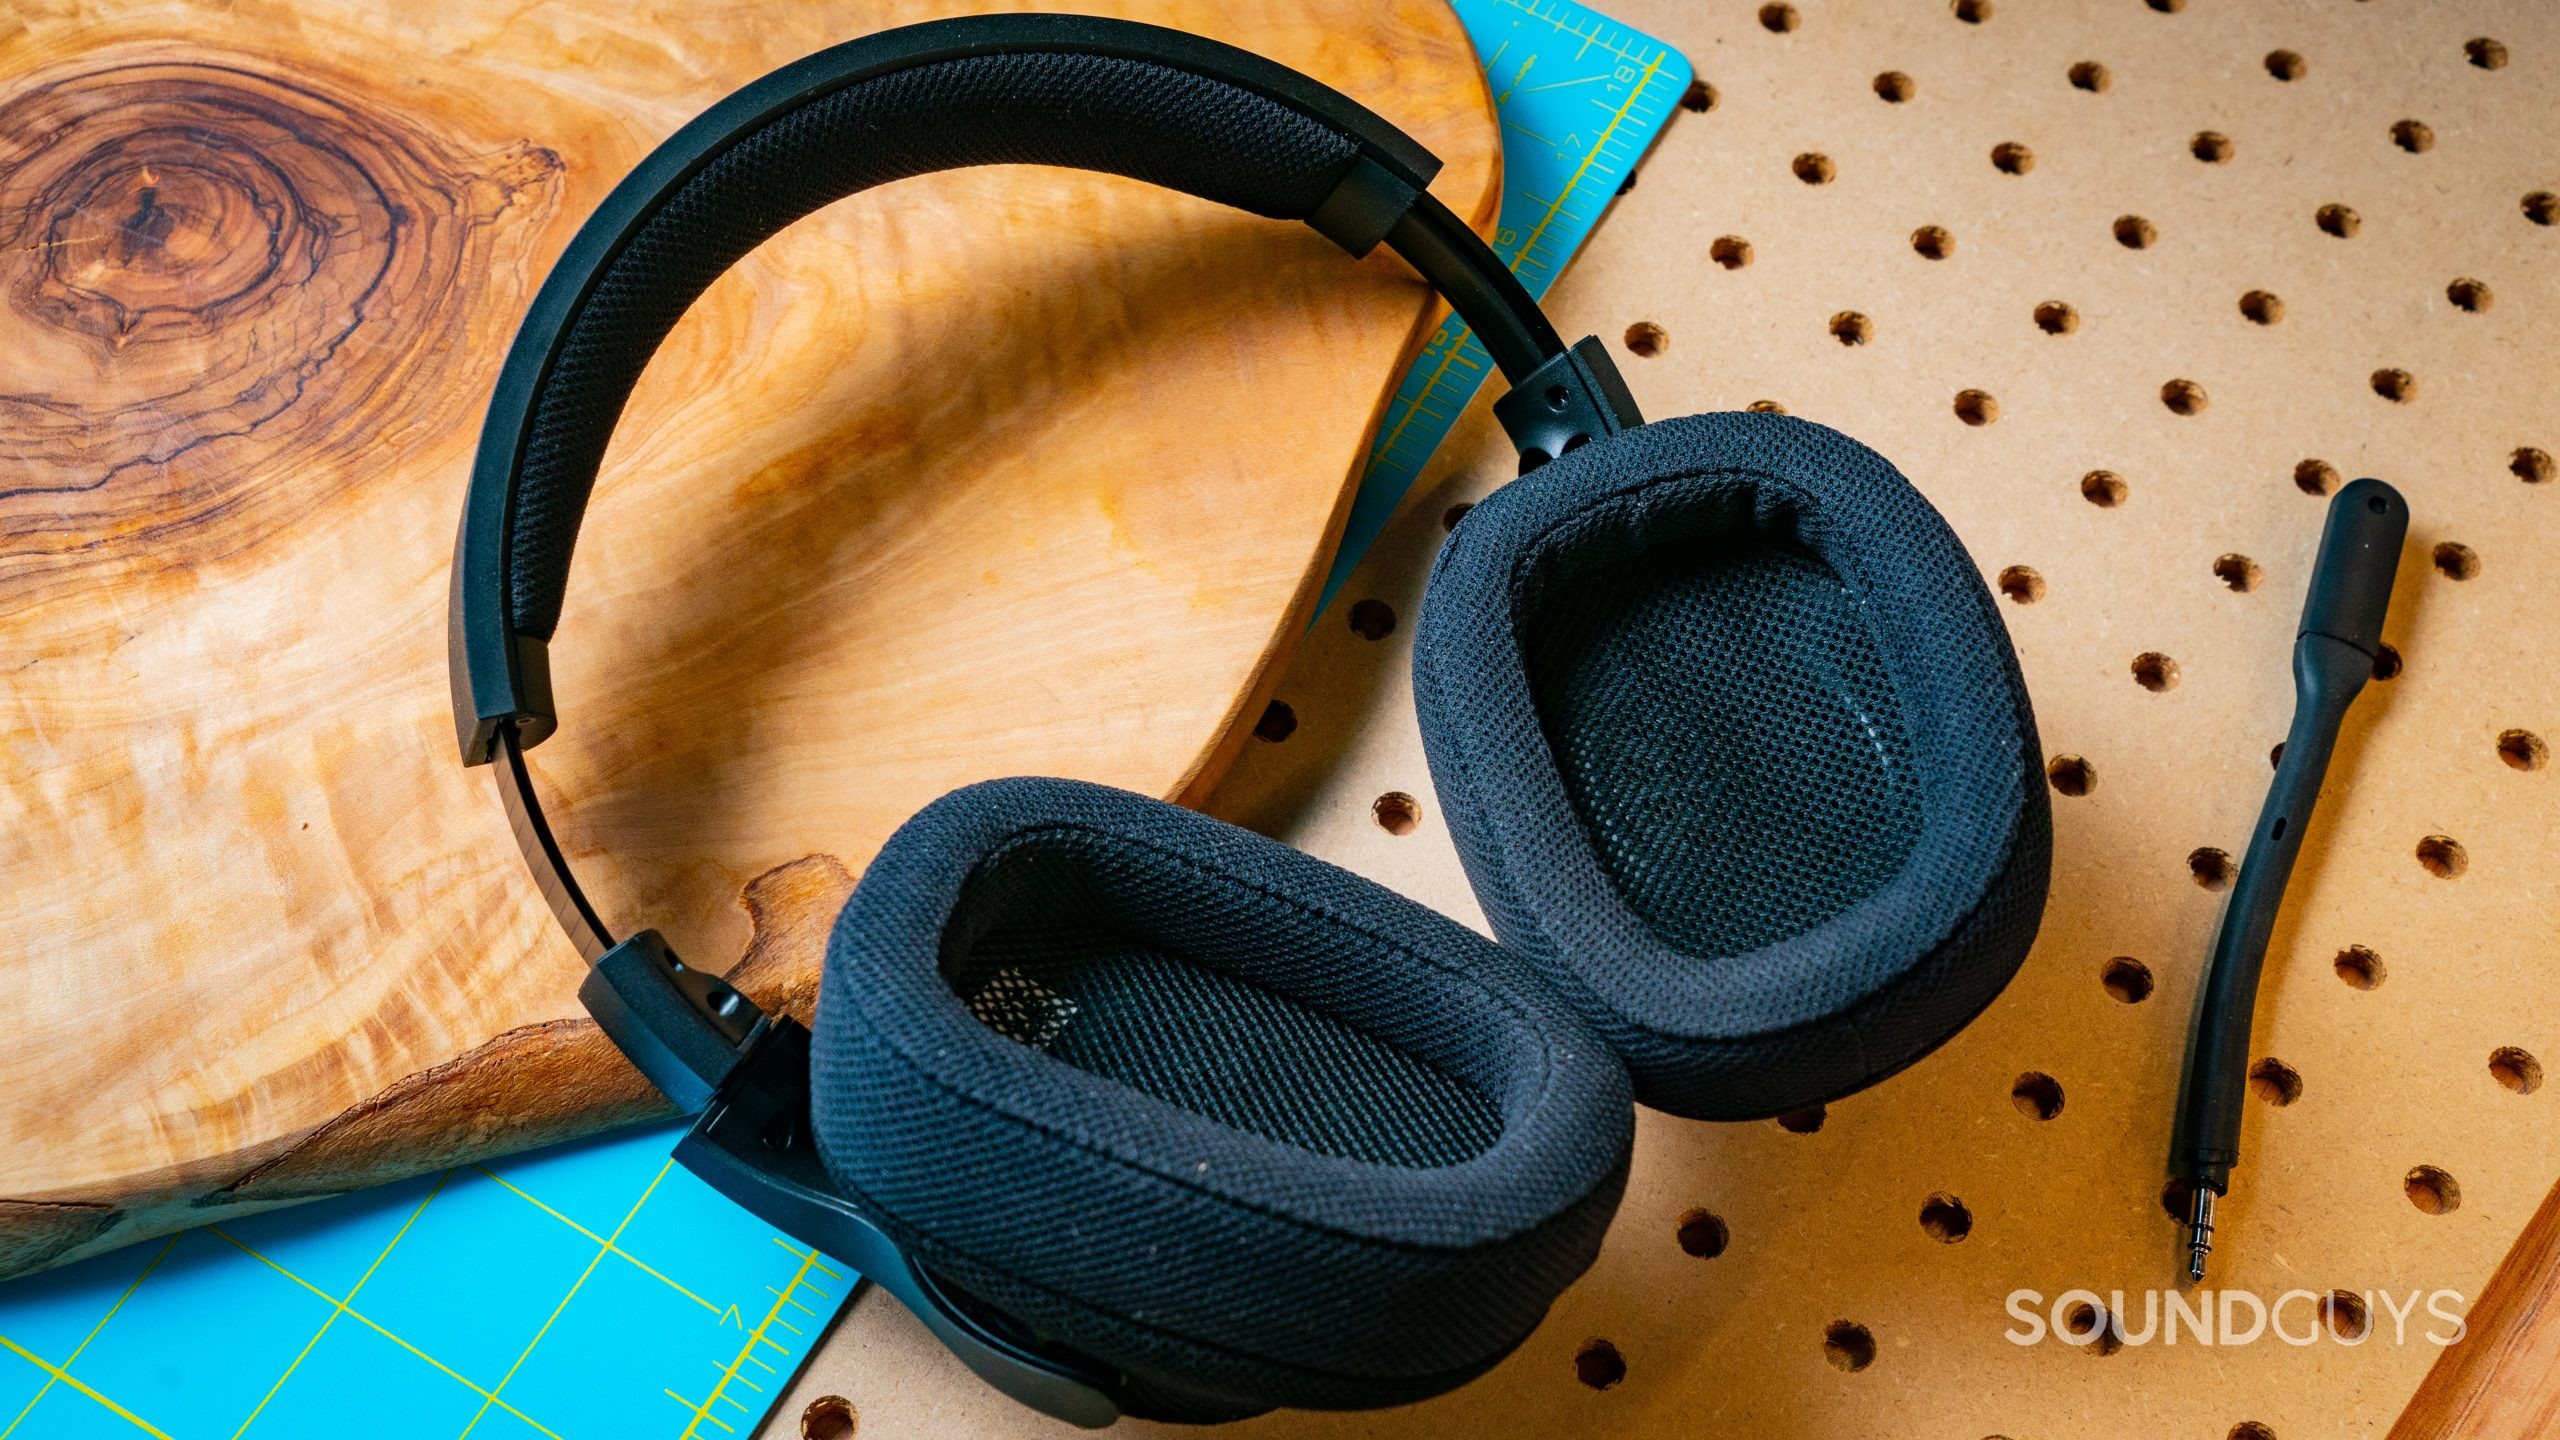 The Logitech G433 sitting on top of a wooden surface with the insides of the ear cups facing the viewer.